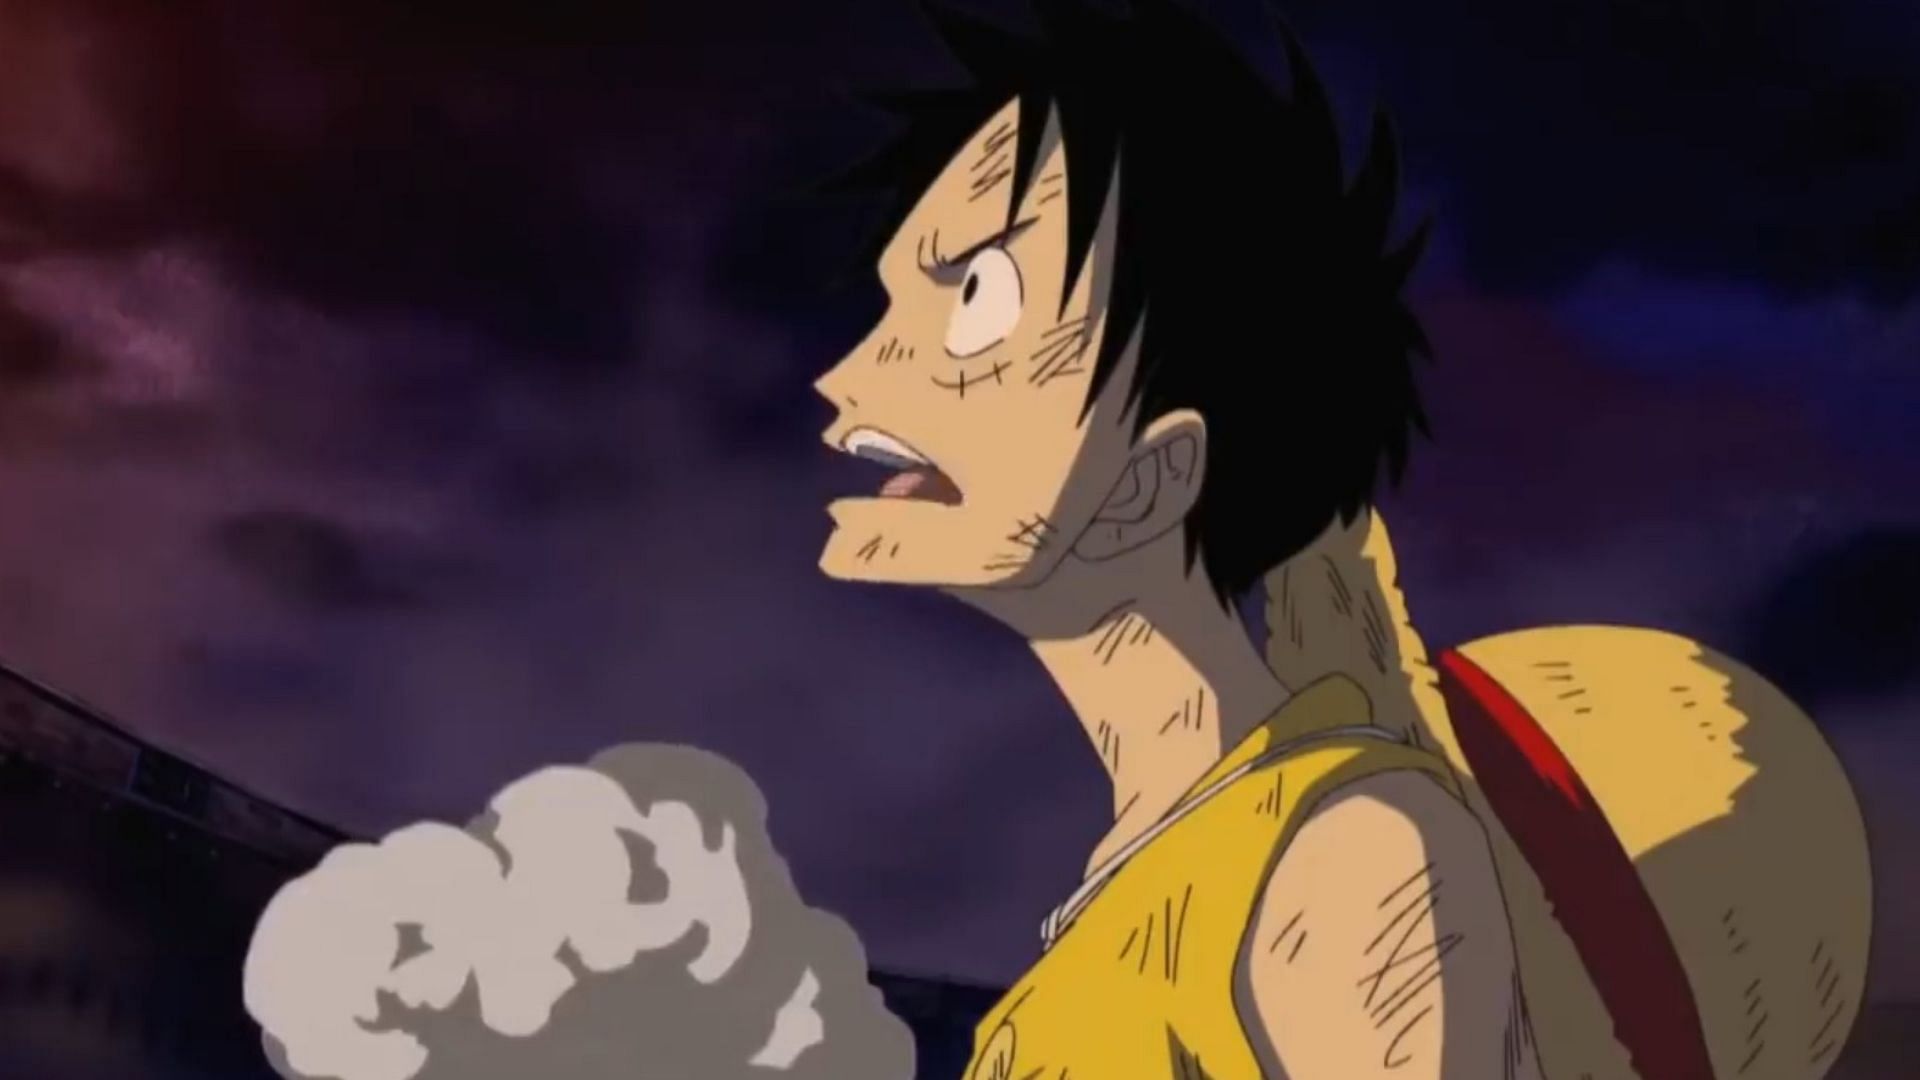 Luffy from the One Piece anime (Image via Toei Animation)